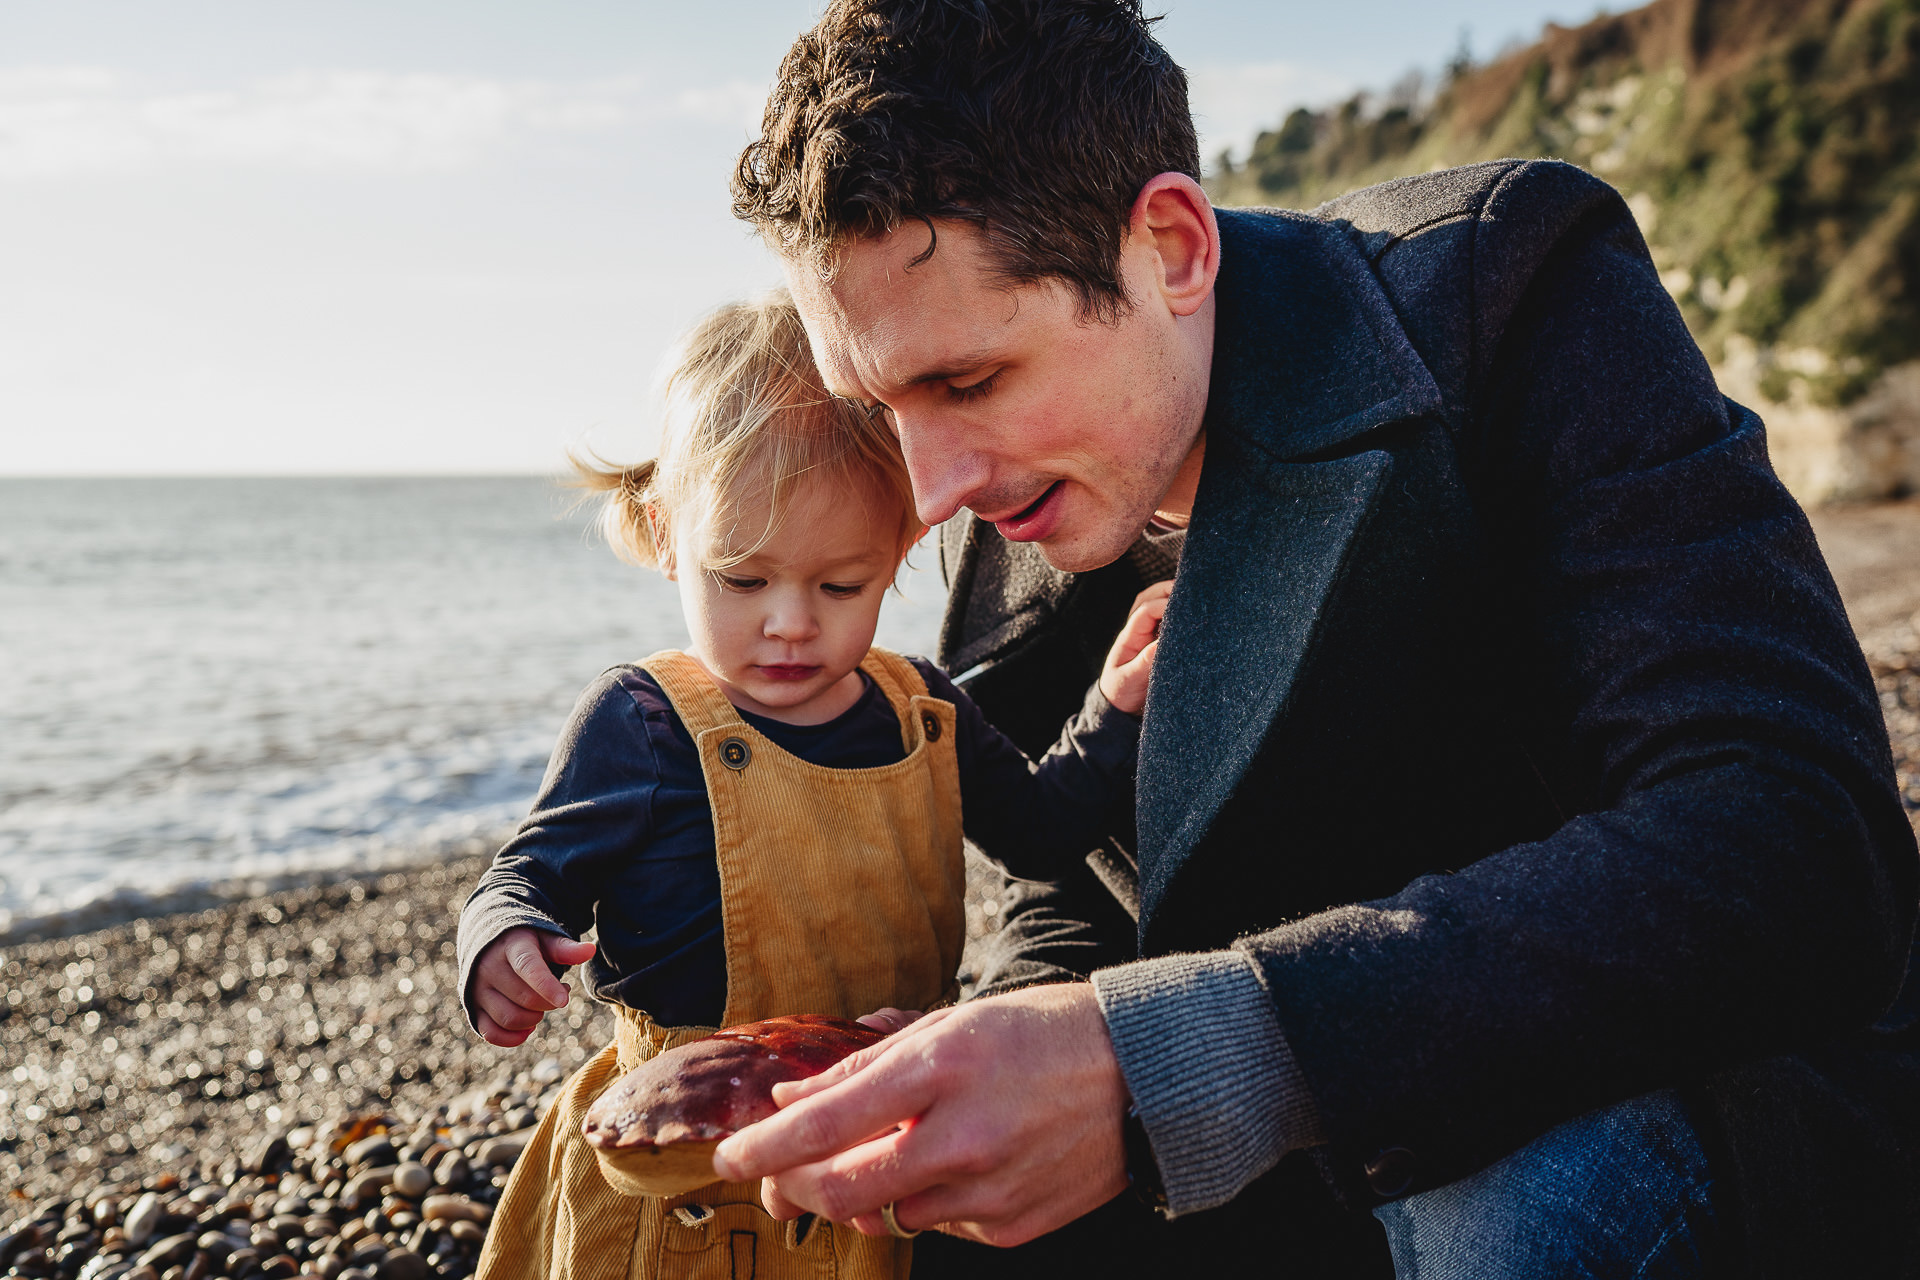 A father and daughter on a beach looking at a crab shell